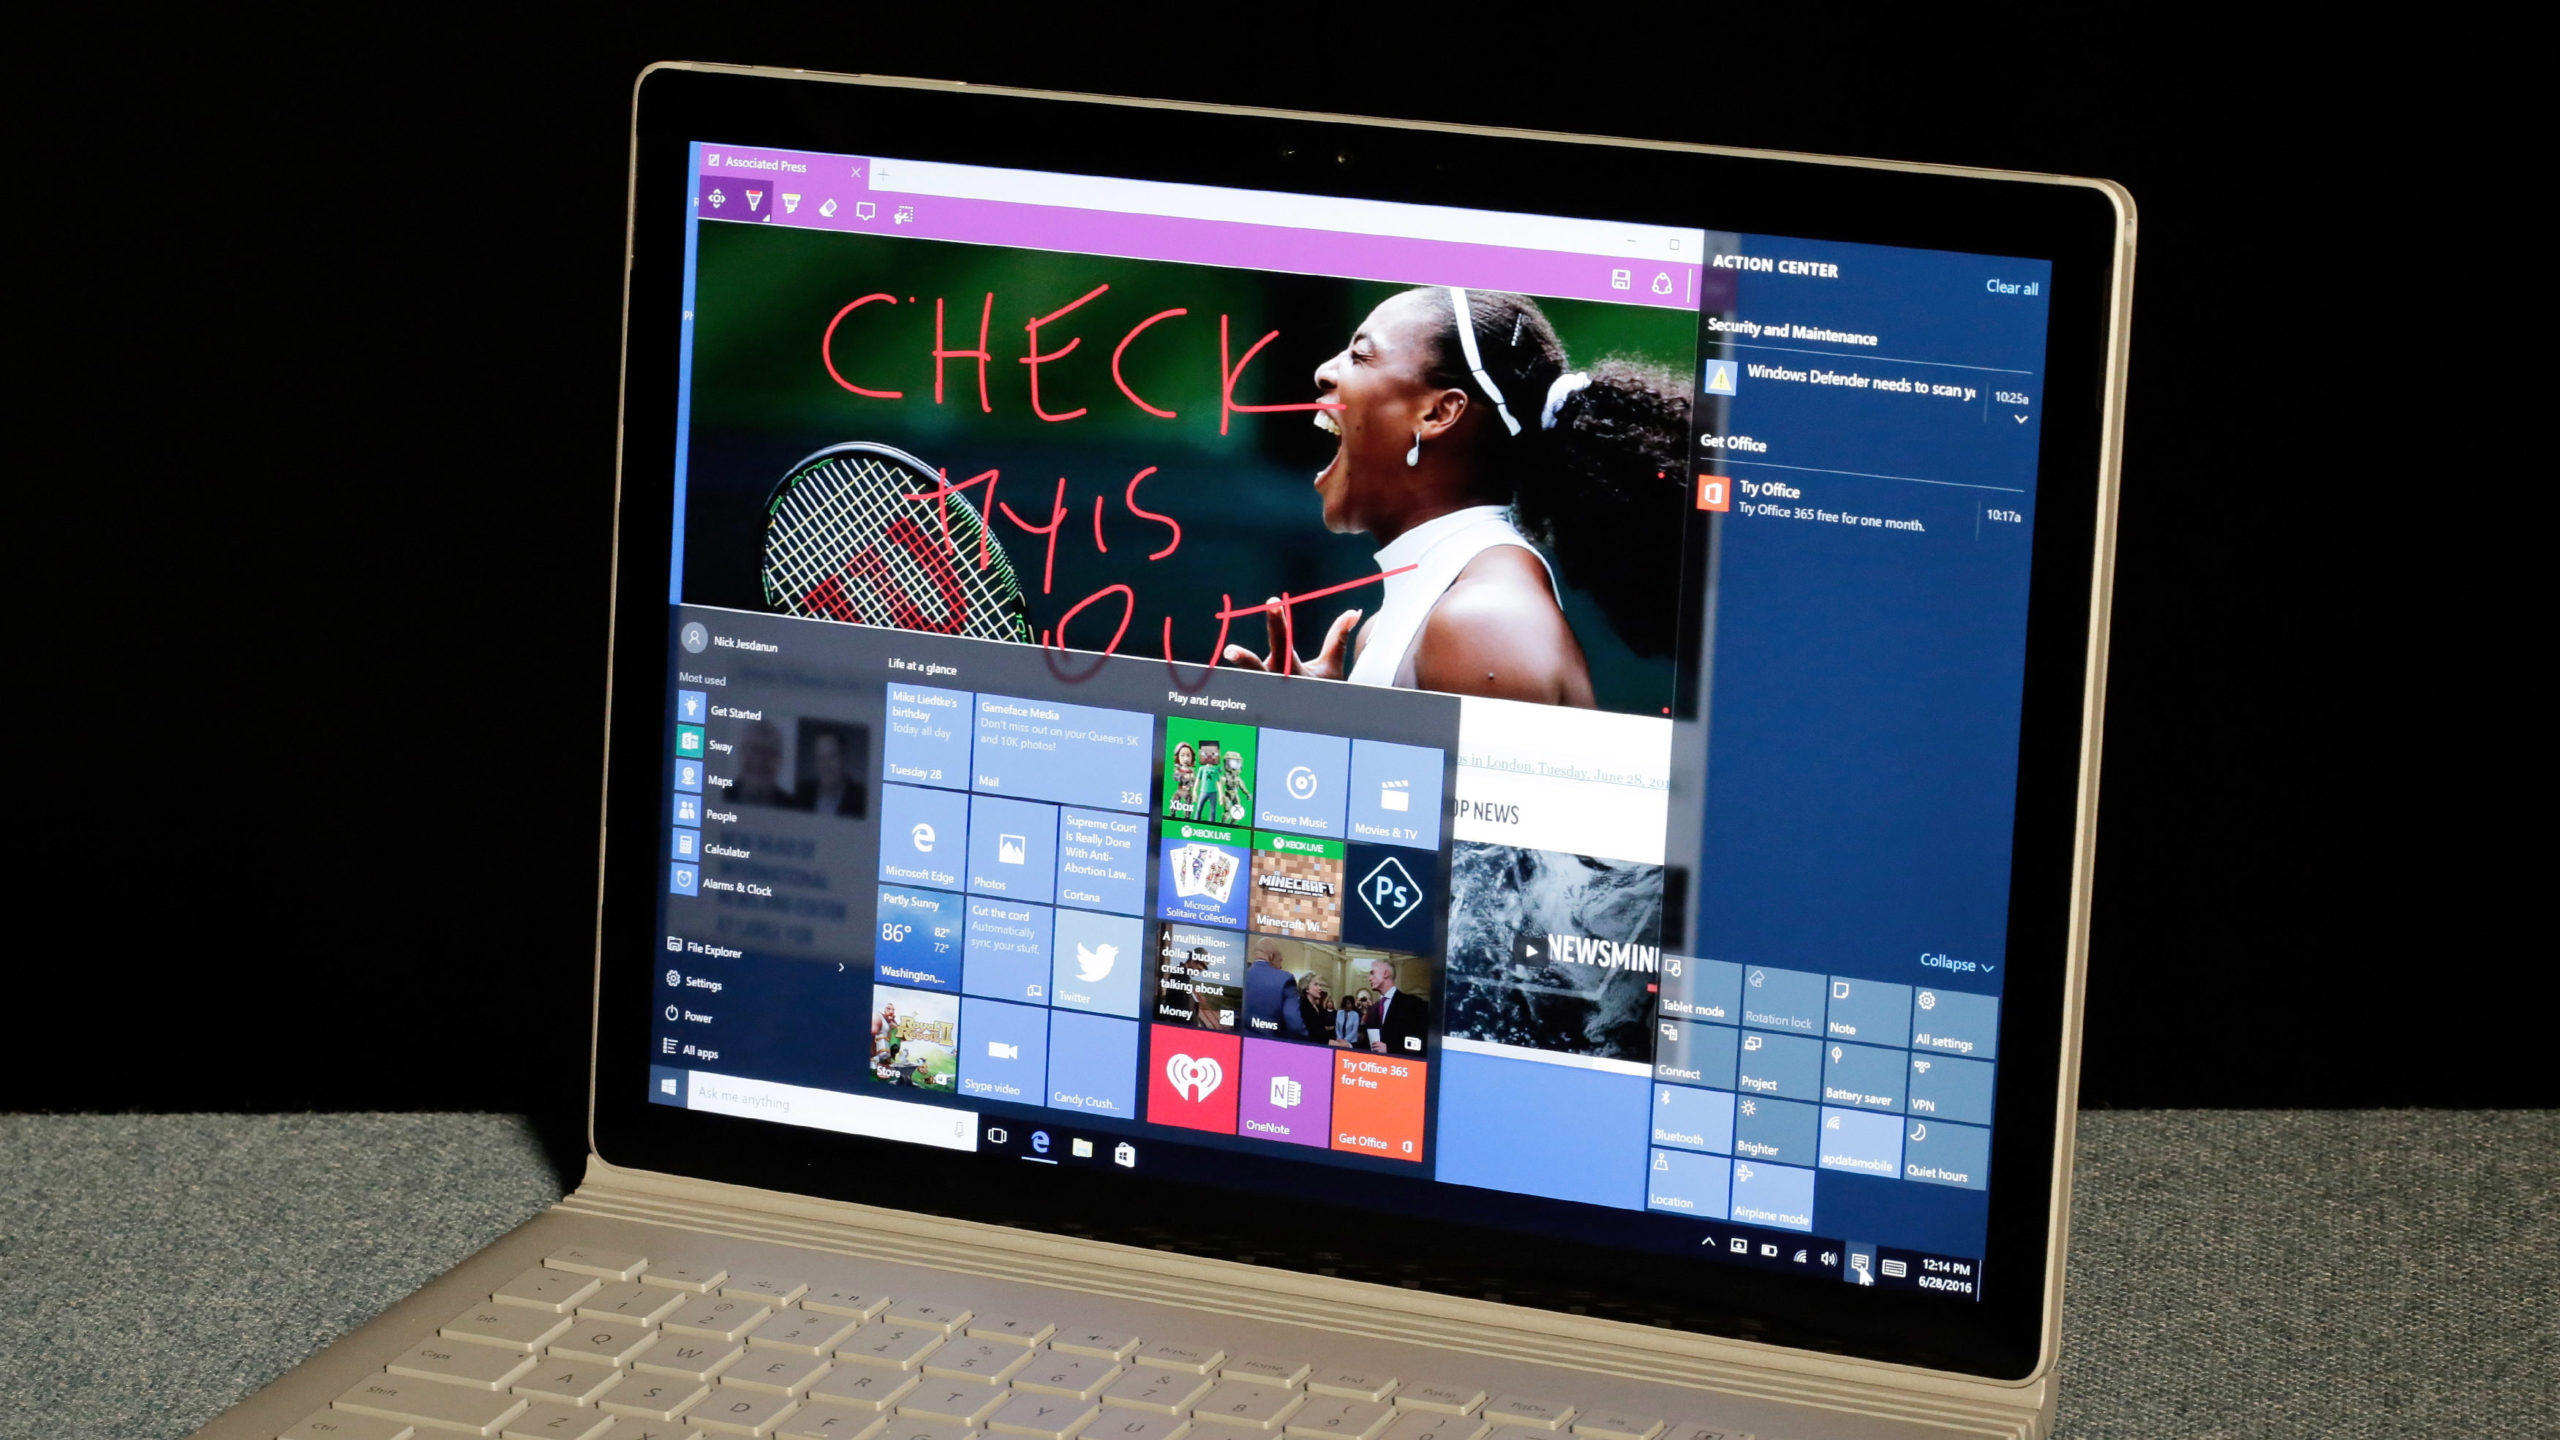 Five Reasons You Should Update To Windows 10 If You Haven’t Already